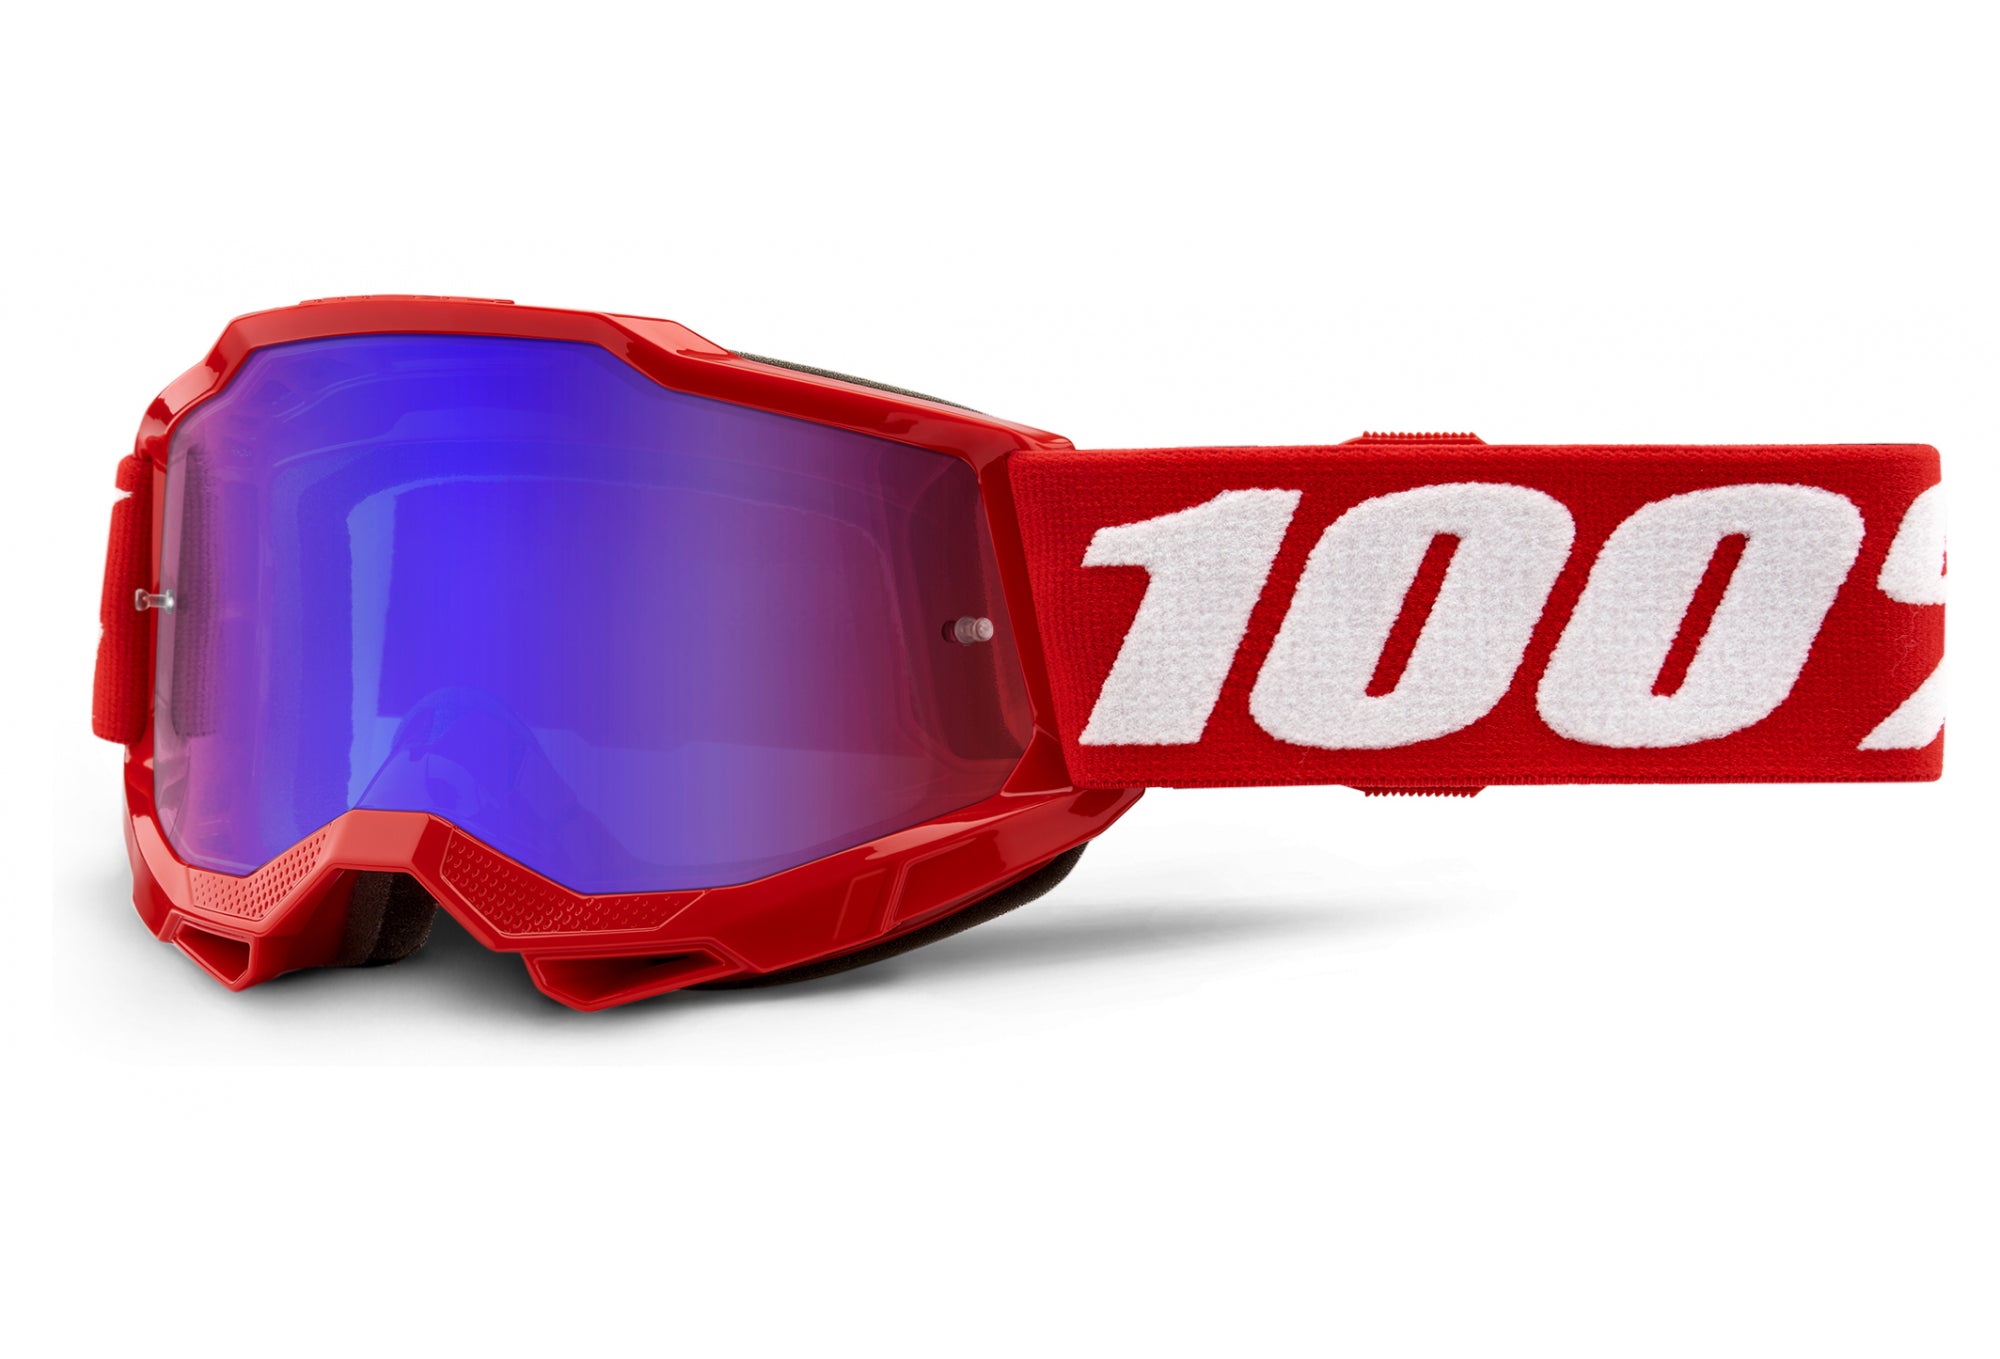 Goggles ACCURI 2 YOUTH RED - MIRROR RED/BLUE LENS